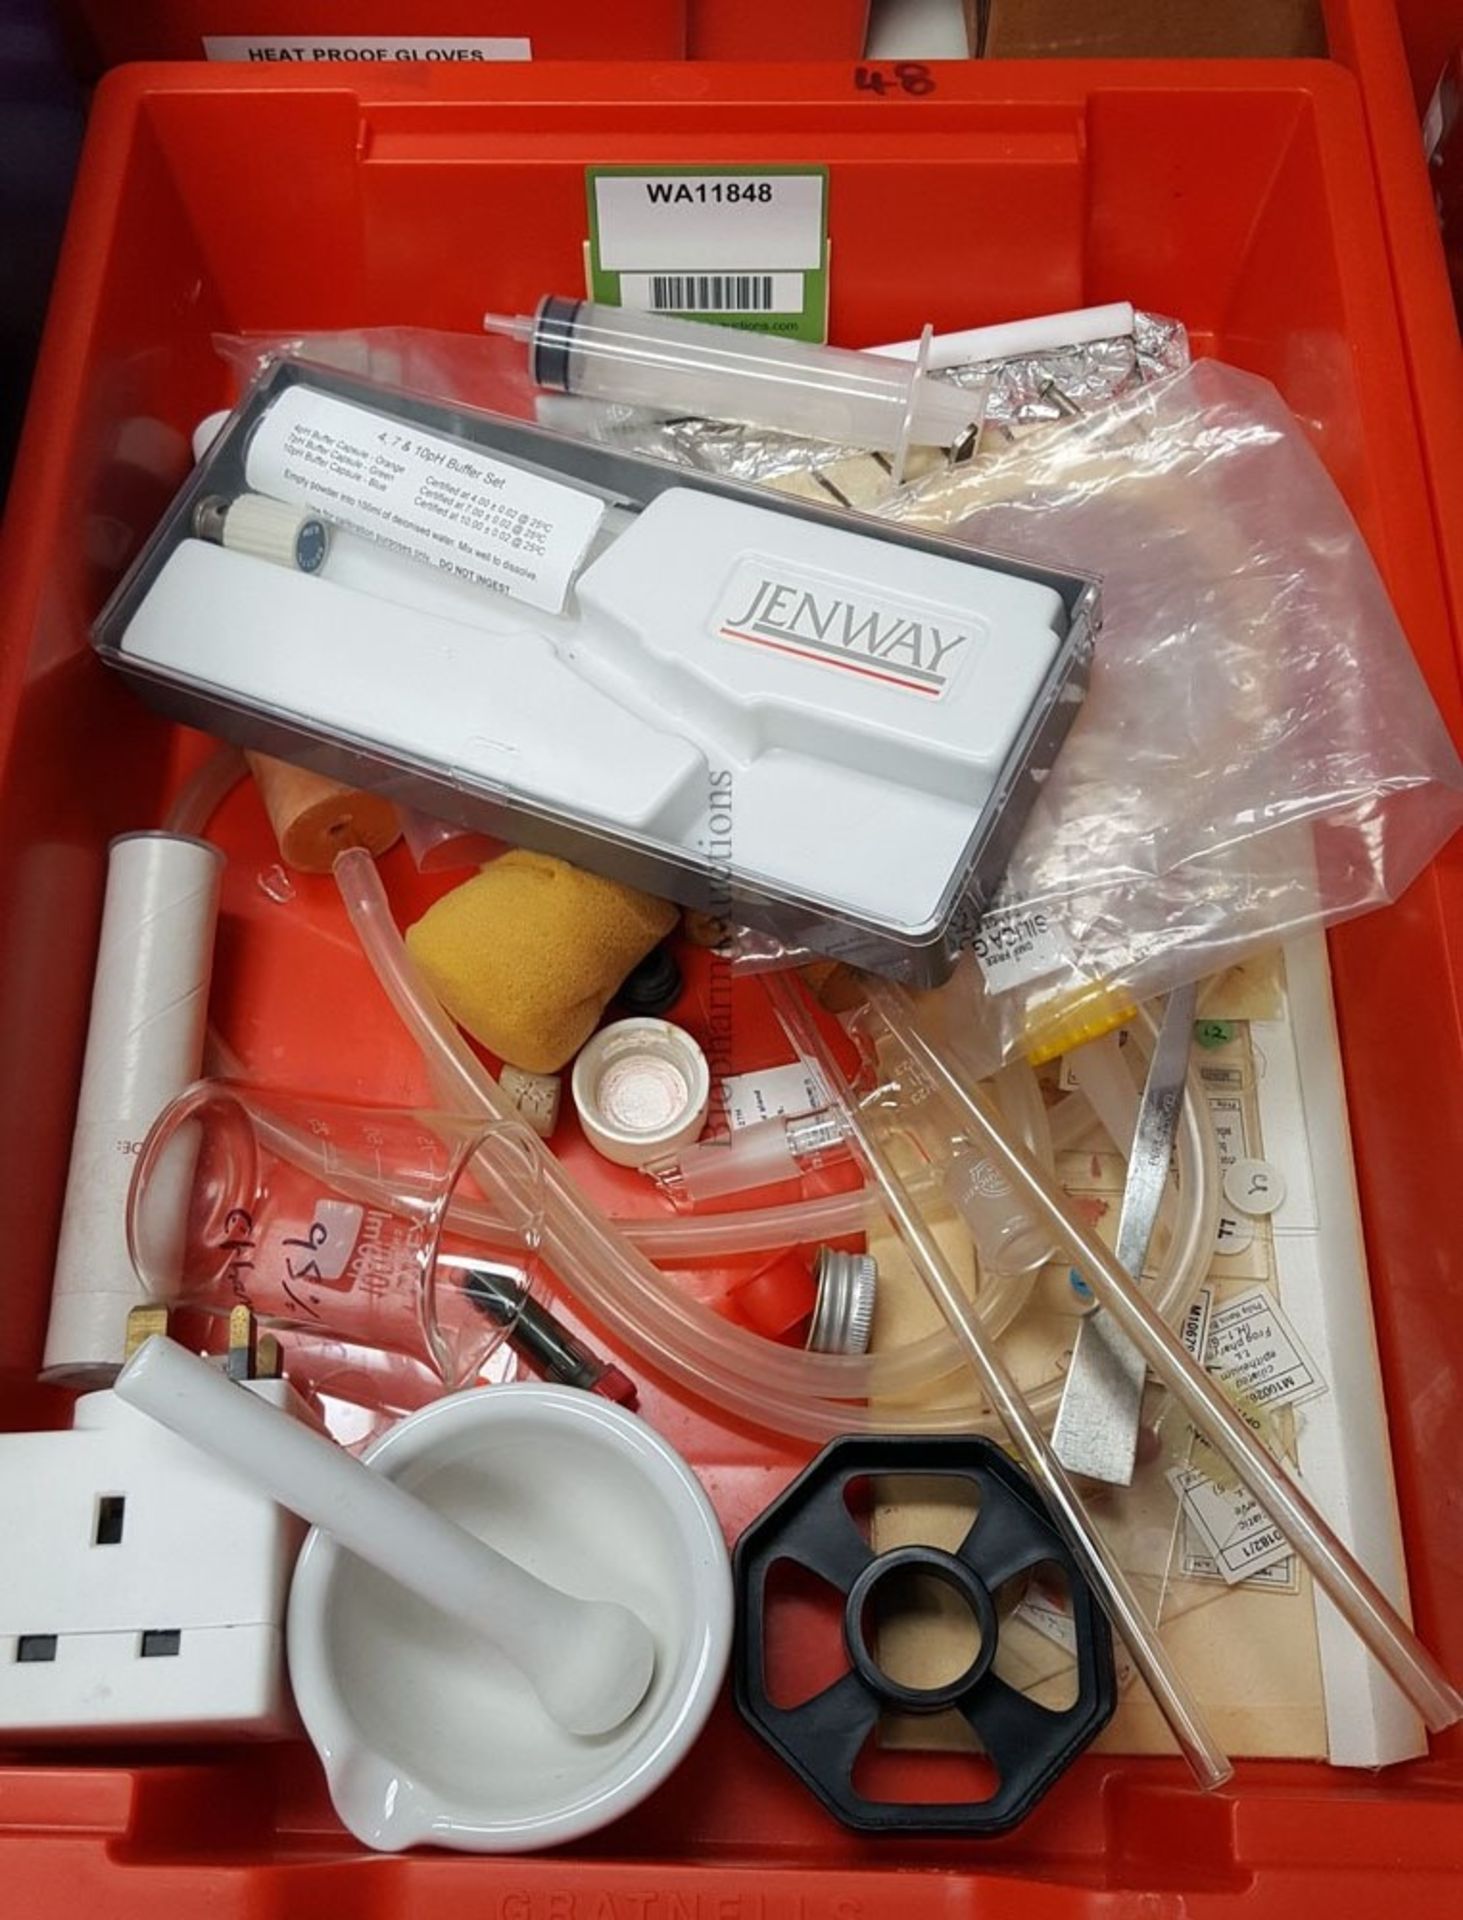 Assorted school lab items including: mortar & pestle, pipettes, etc. (Ref: WA11848)